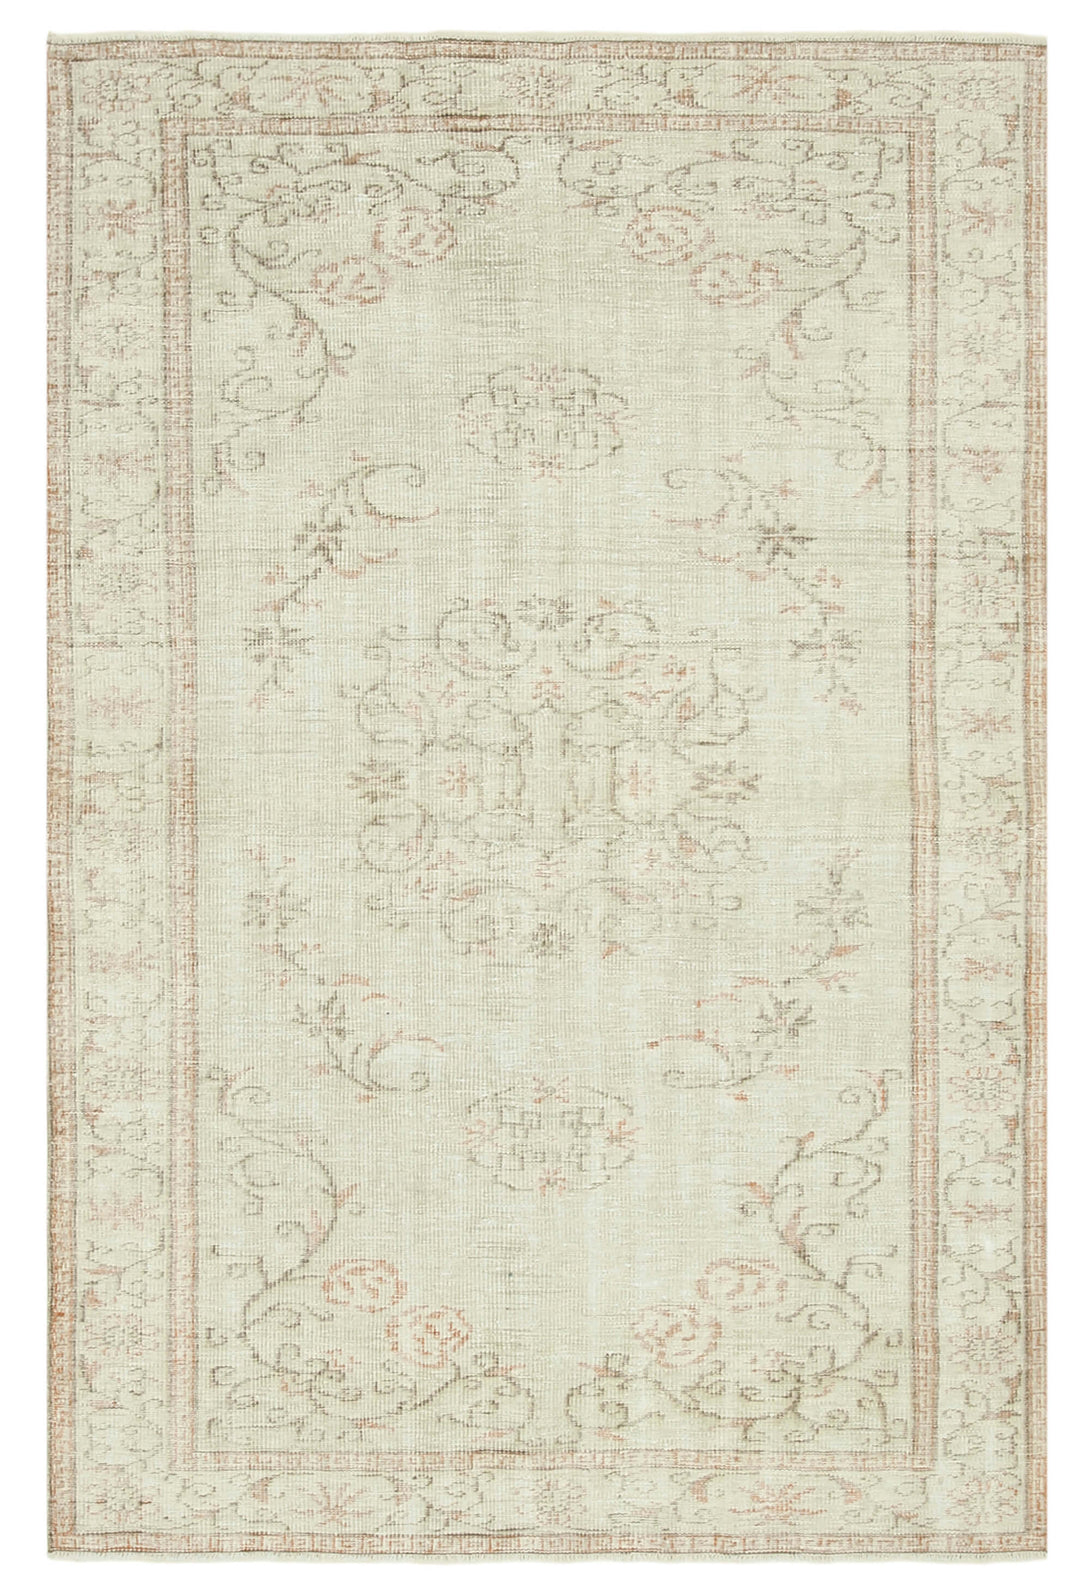 Handmade White Wash Area Rug > Design# OL-AC-38880 > Size: 5'-11" x 8'-11", Carpet Culture Rugs, Handmade Rugs, NYC Rugs, New Rugs, Shop Rugs, Rug Store, Outlet Rugs, SoHo Rugs, Rugs in USA